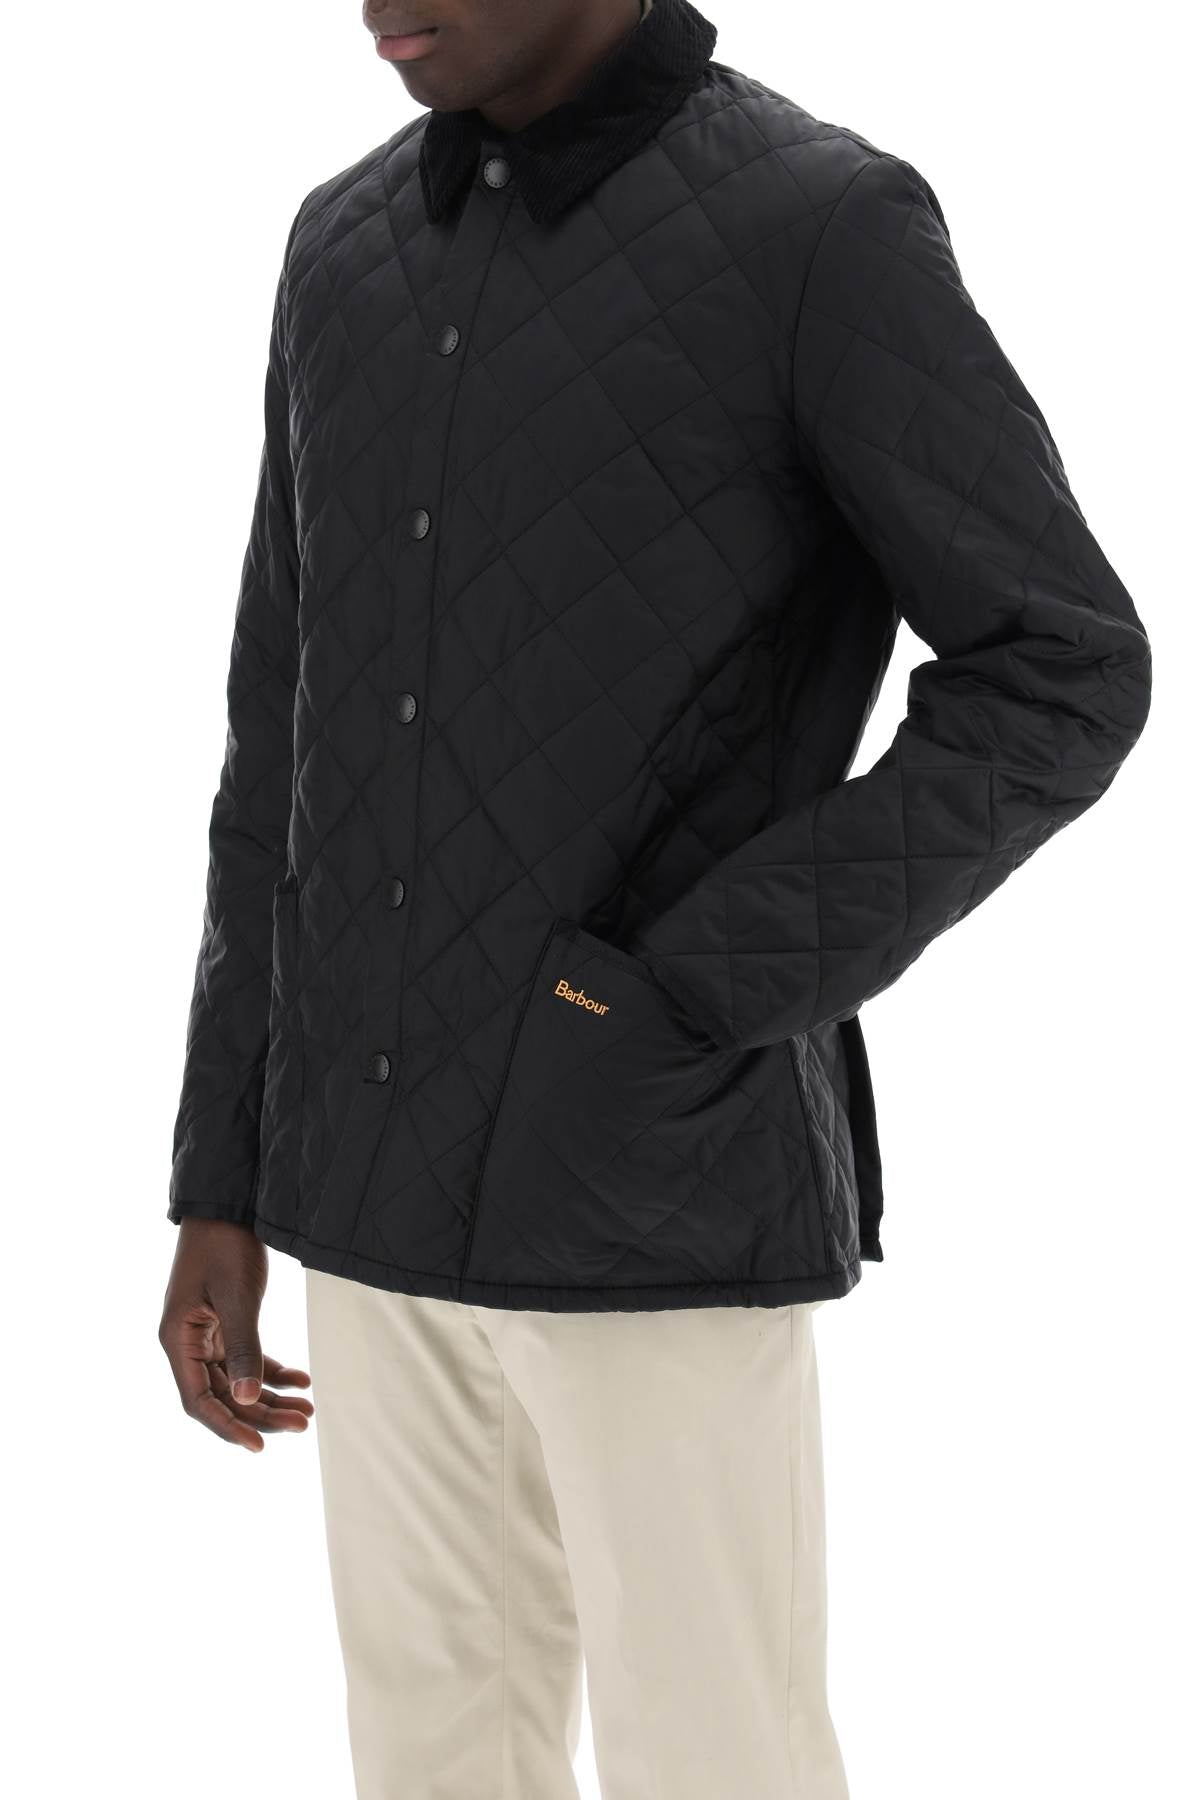 Barbour heritage liddesdale quilted jacket-3